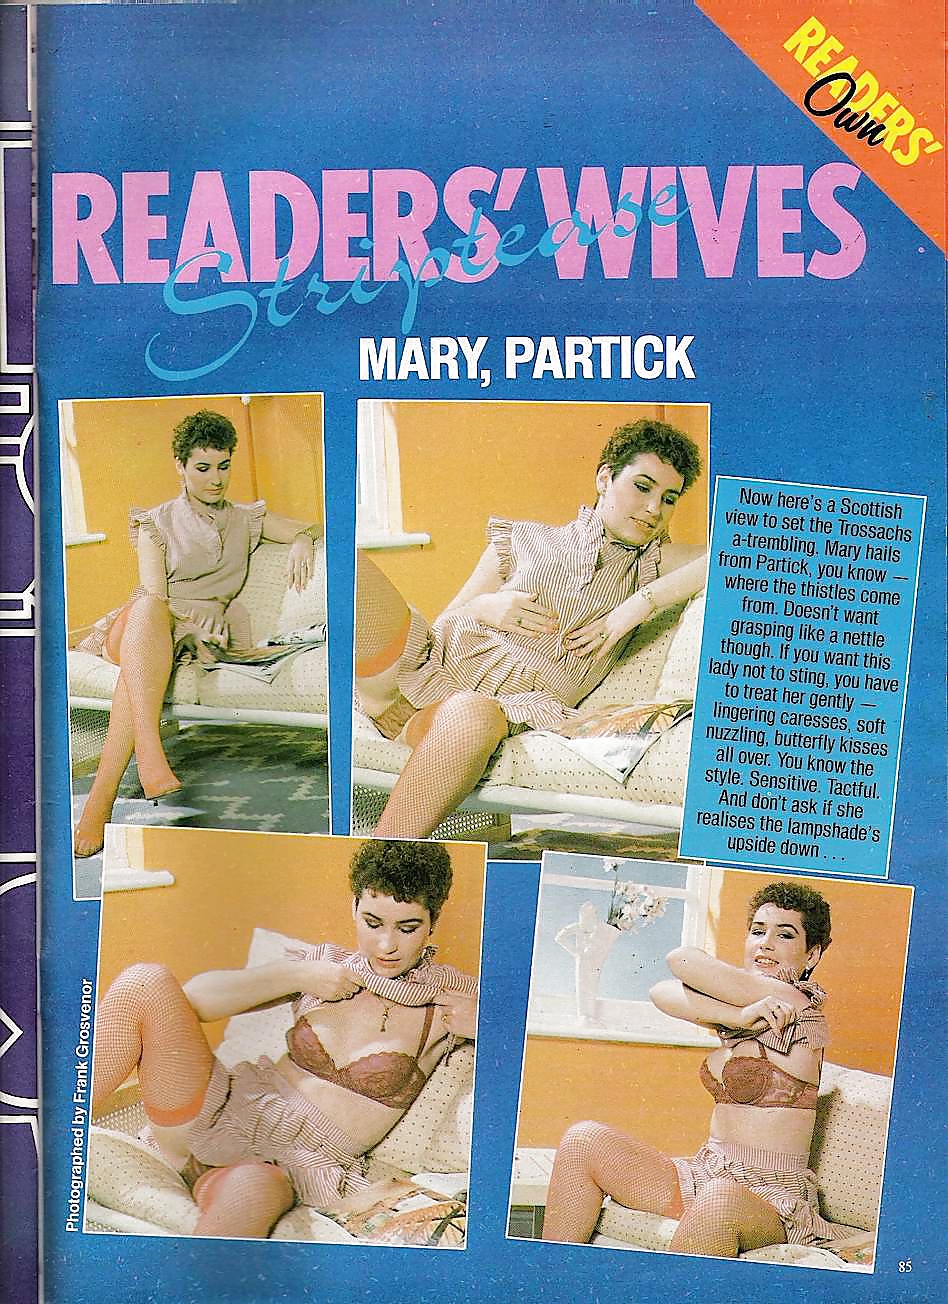 Sex READERS WIFE MARY OF PARTICK GLASGOW SCOTLAND image 70113069 pic